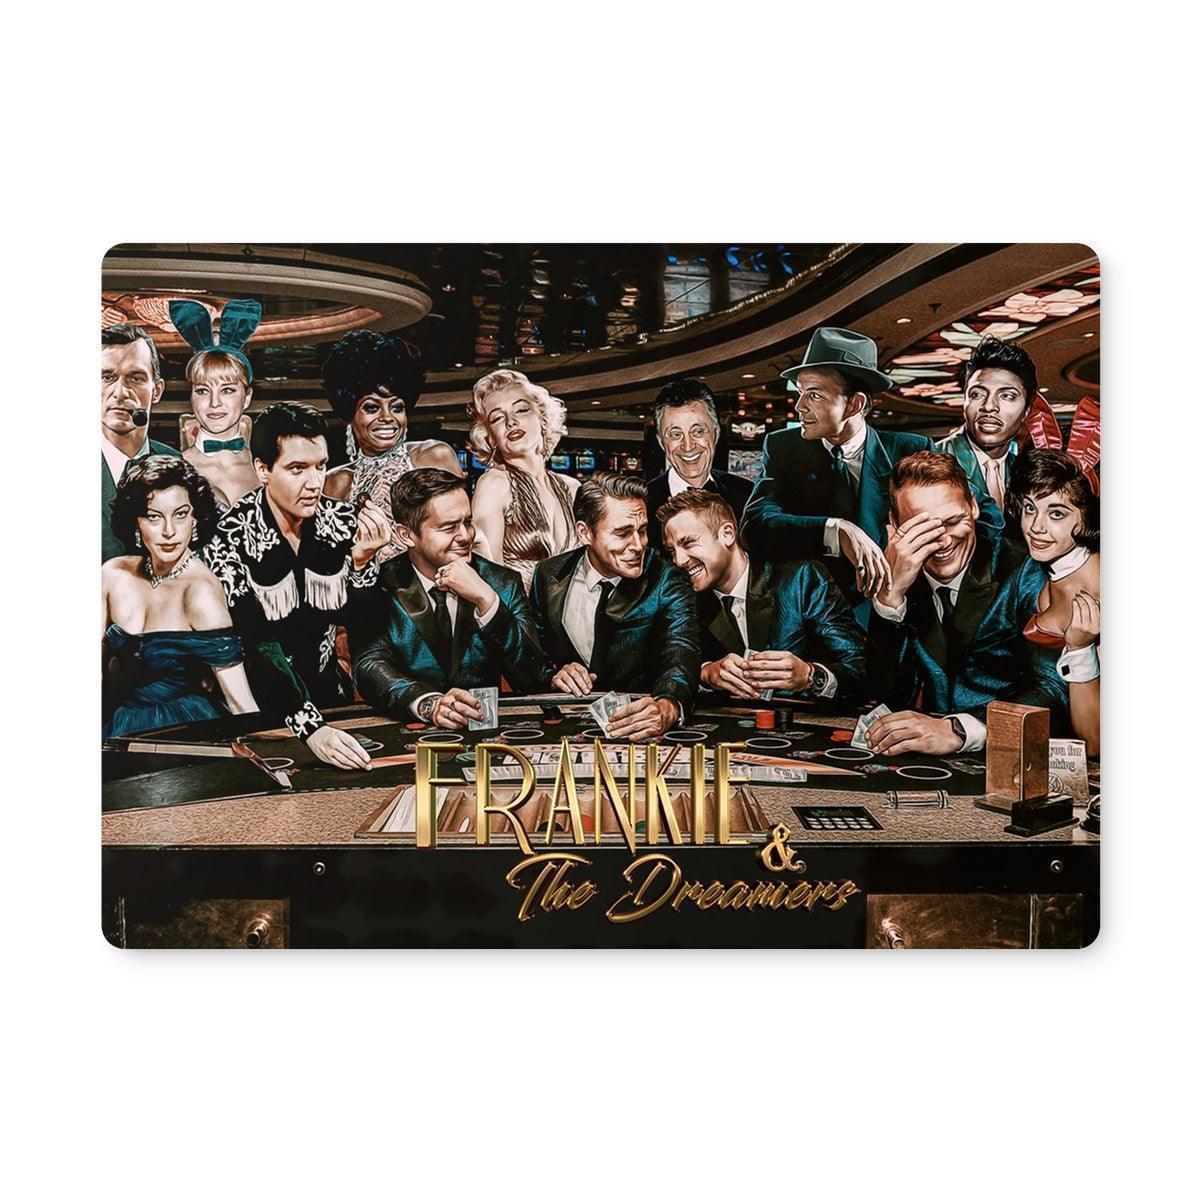 Frankie And The Dreamers Casino 2 Placemat | Homeware Single Placemat